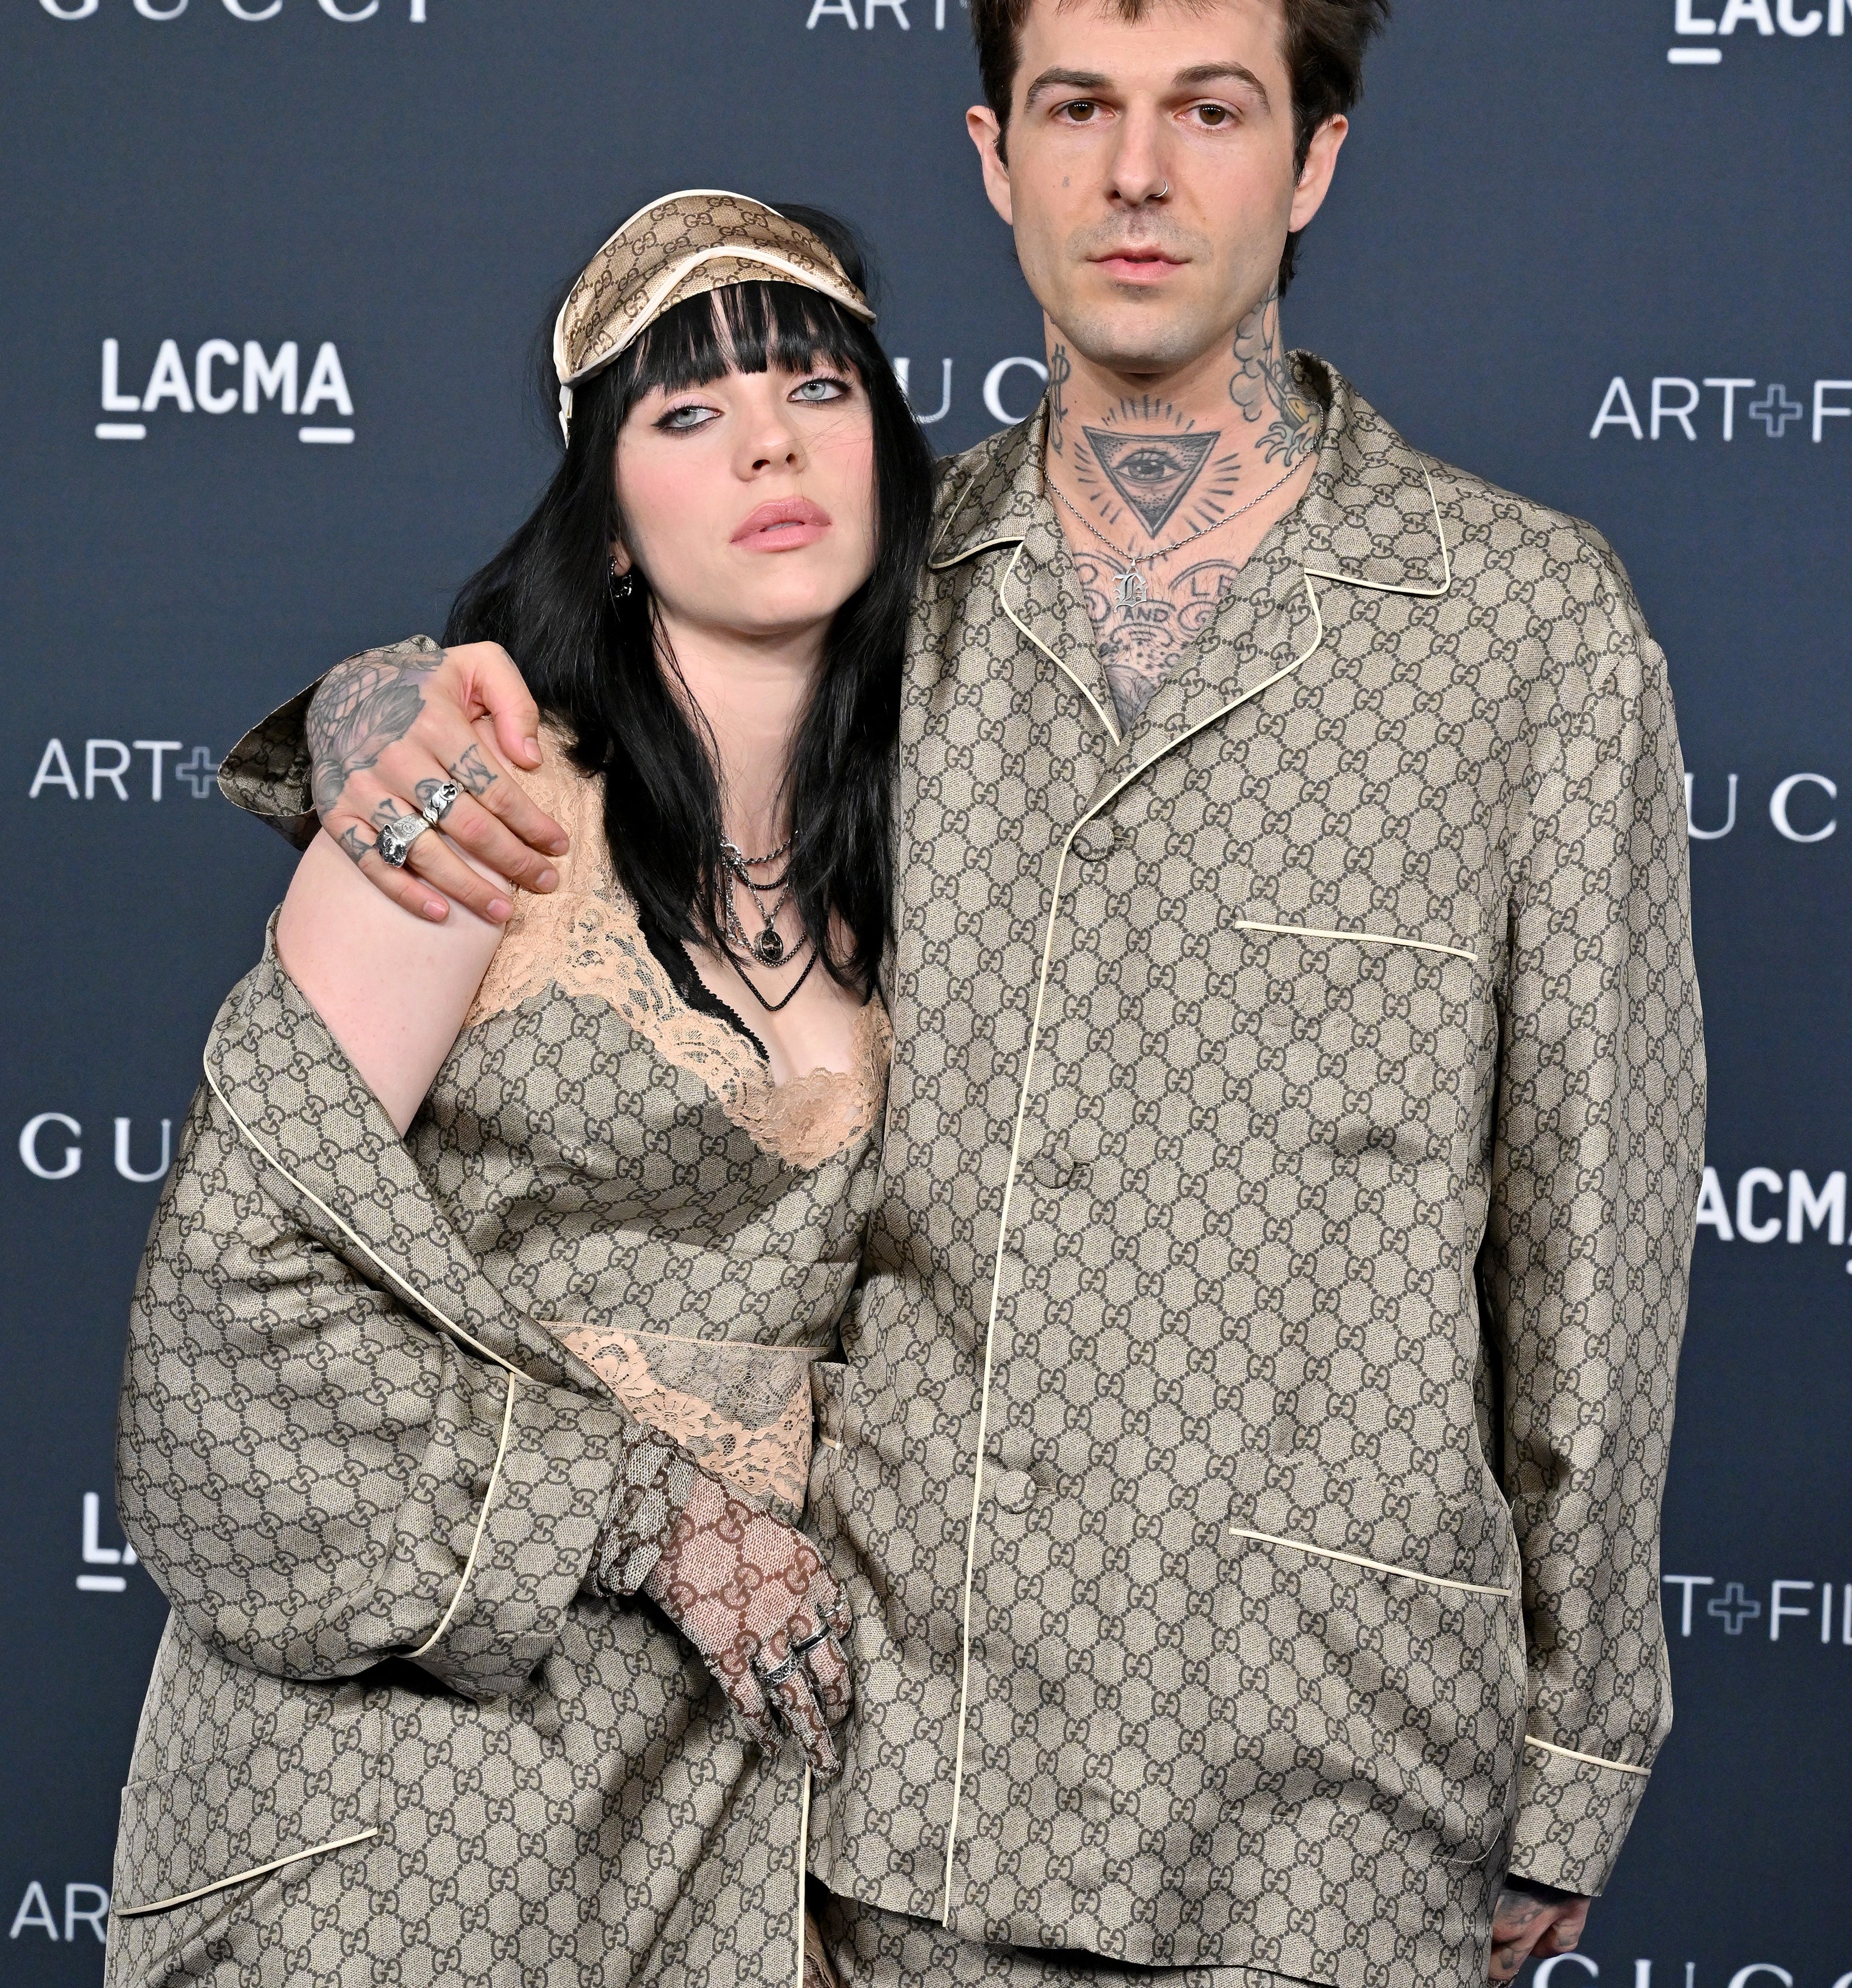 Billie and Jesse together at an event when they were dating